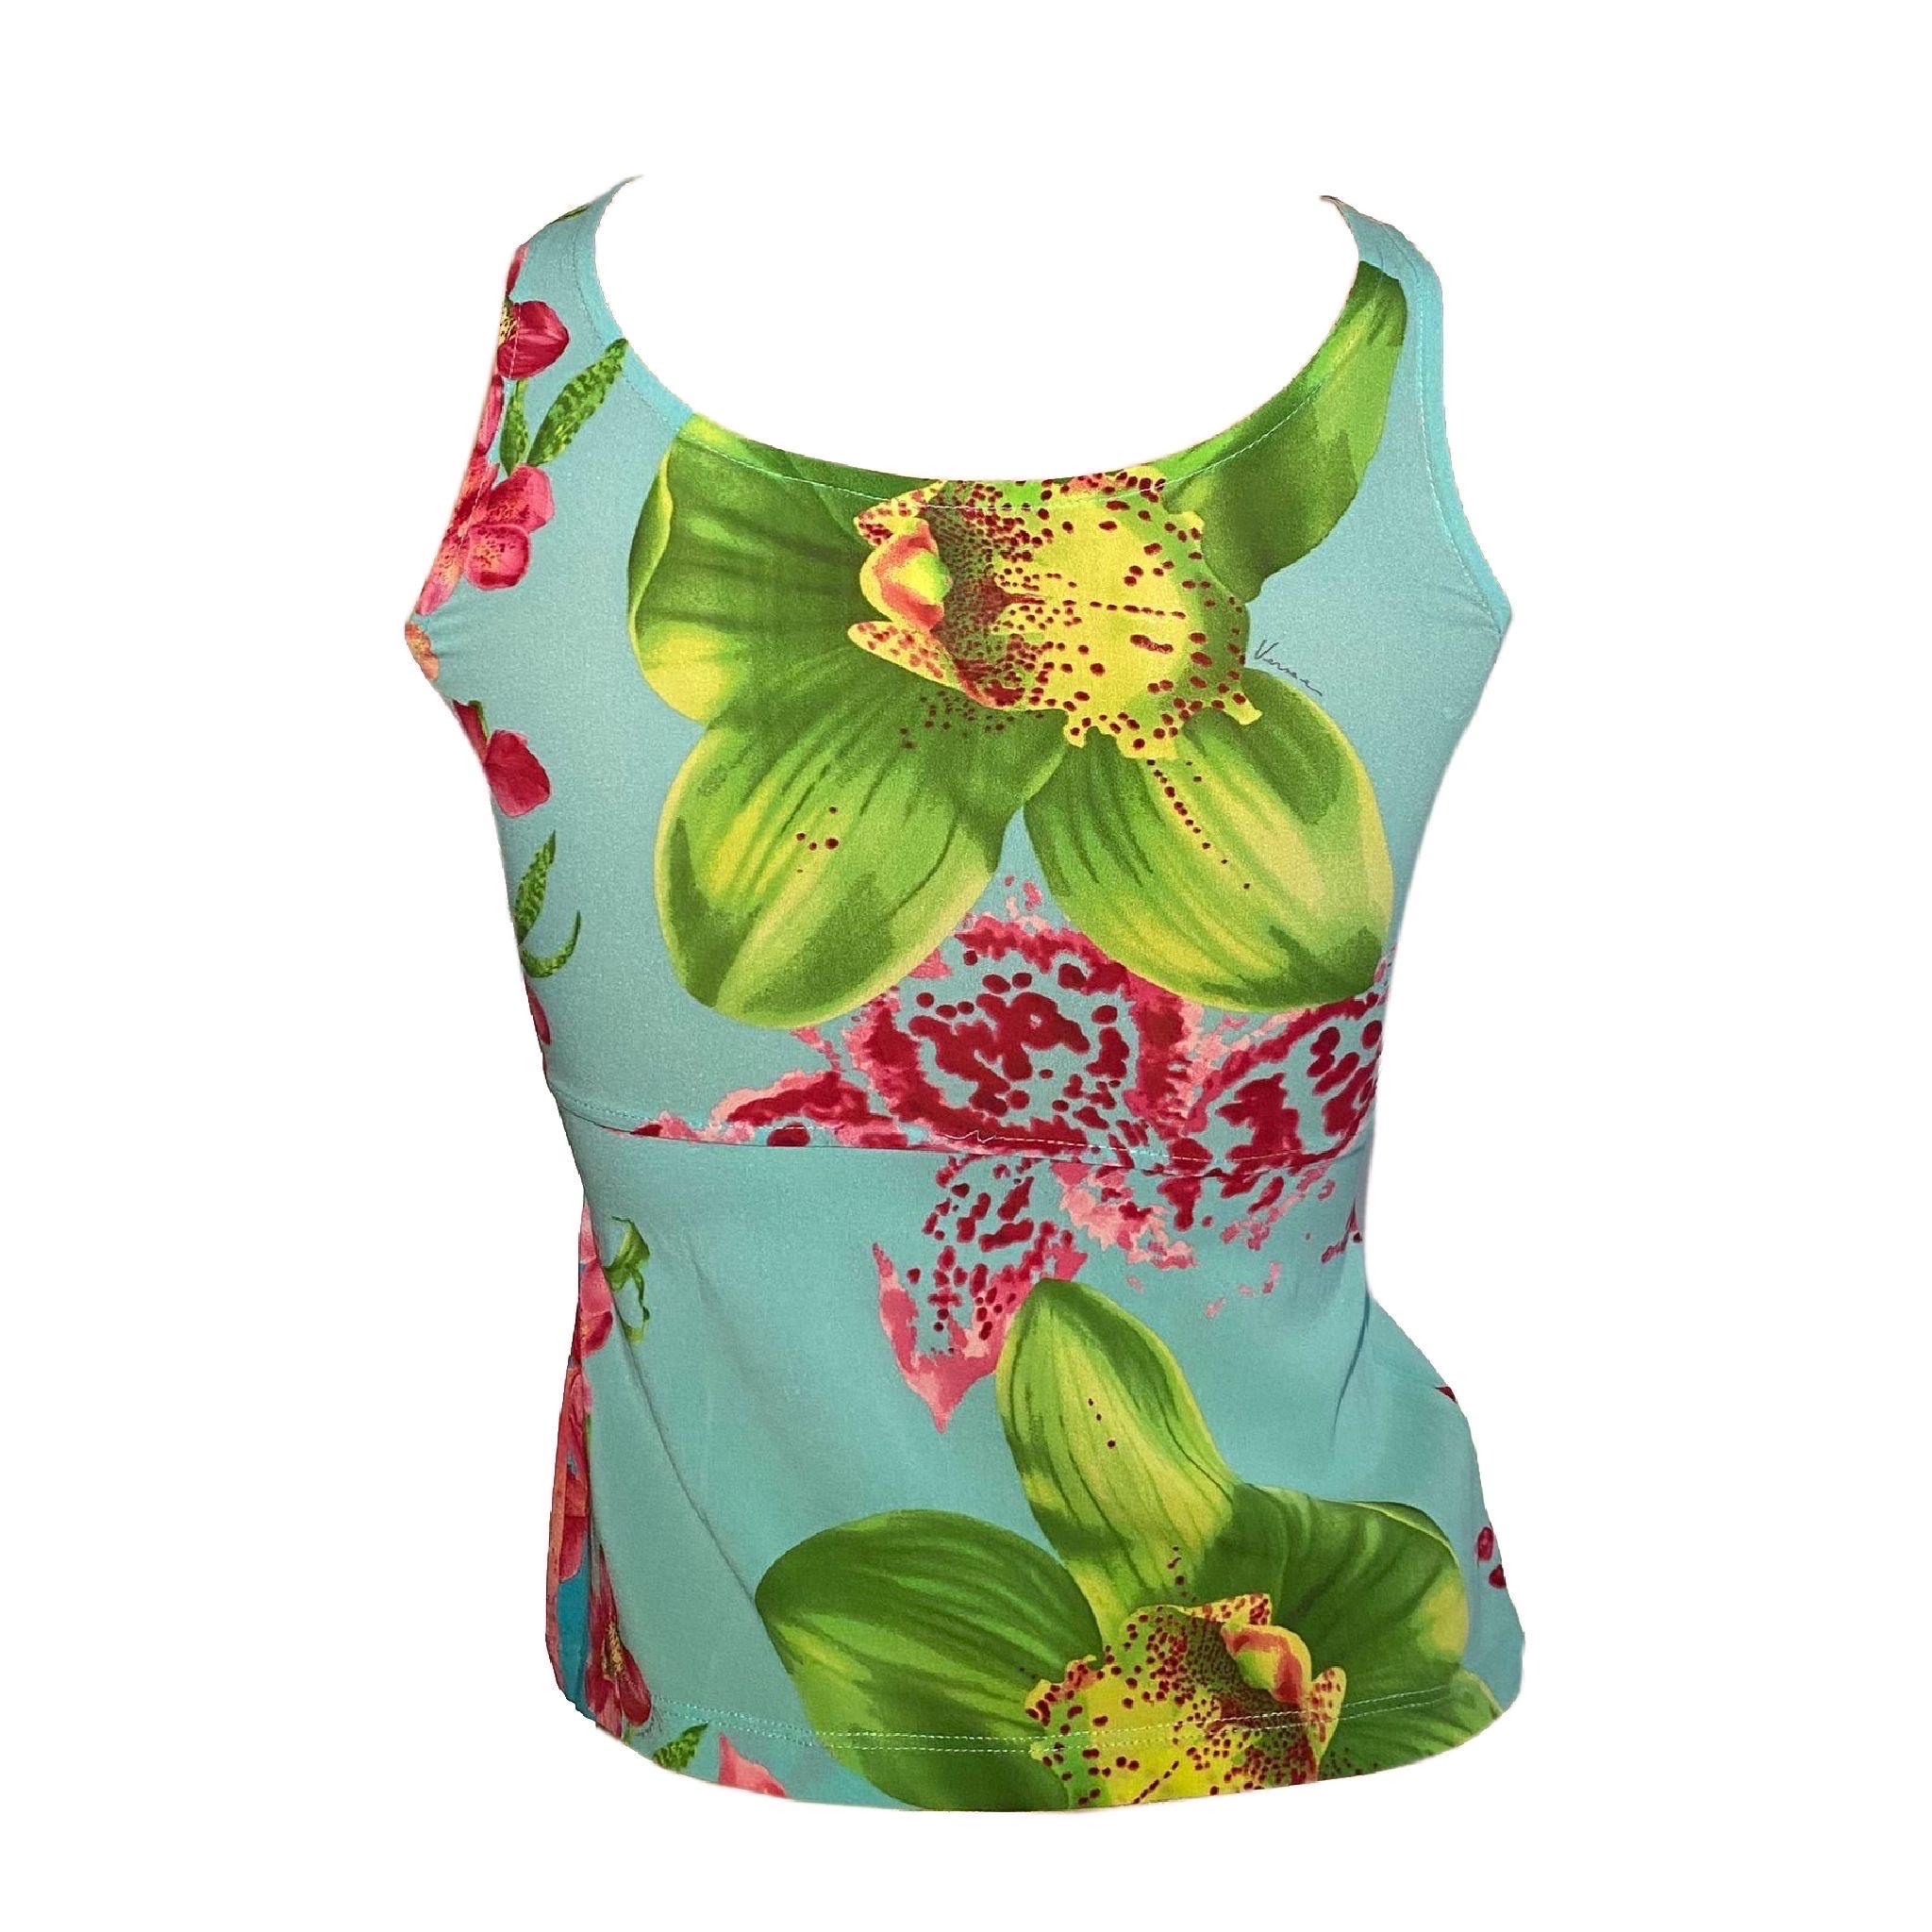 -Versace floral “lily print” pink/turquoise top
-Gold/Clear Medusa Plaques
-Spring/Summer 2004 
-100% silk
-right clear plaque slightly darkened over time, reflected on price

Size 38

Bust: 68 cm / 26.7 inch
Length (from strap): 51.5 cm / 20.2 inch